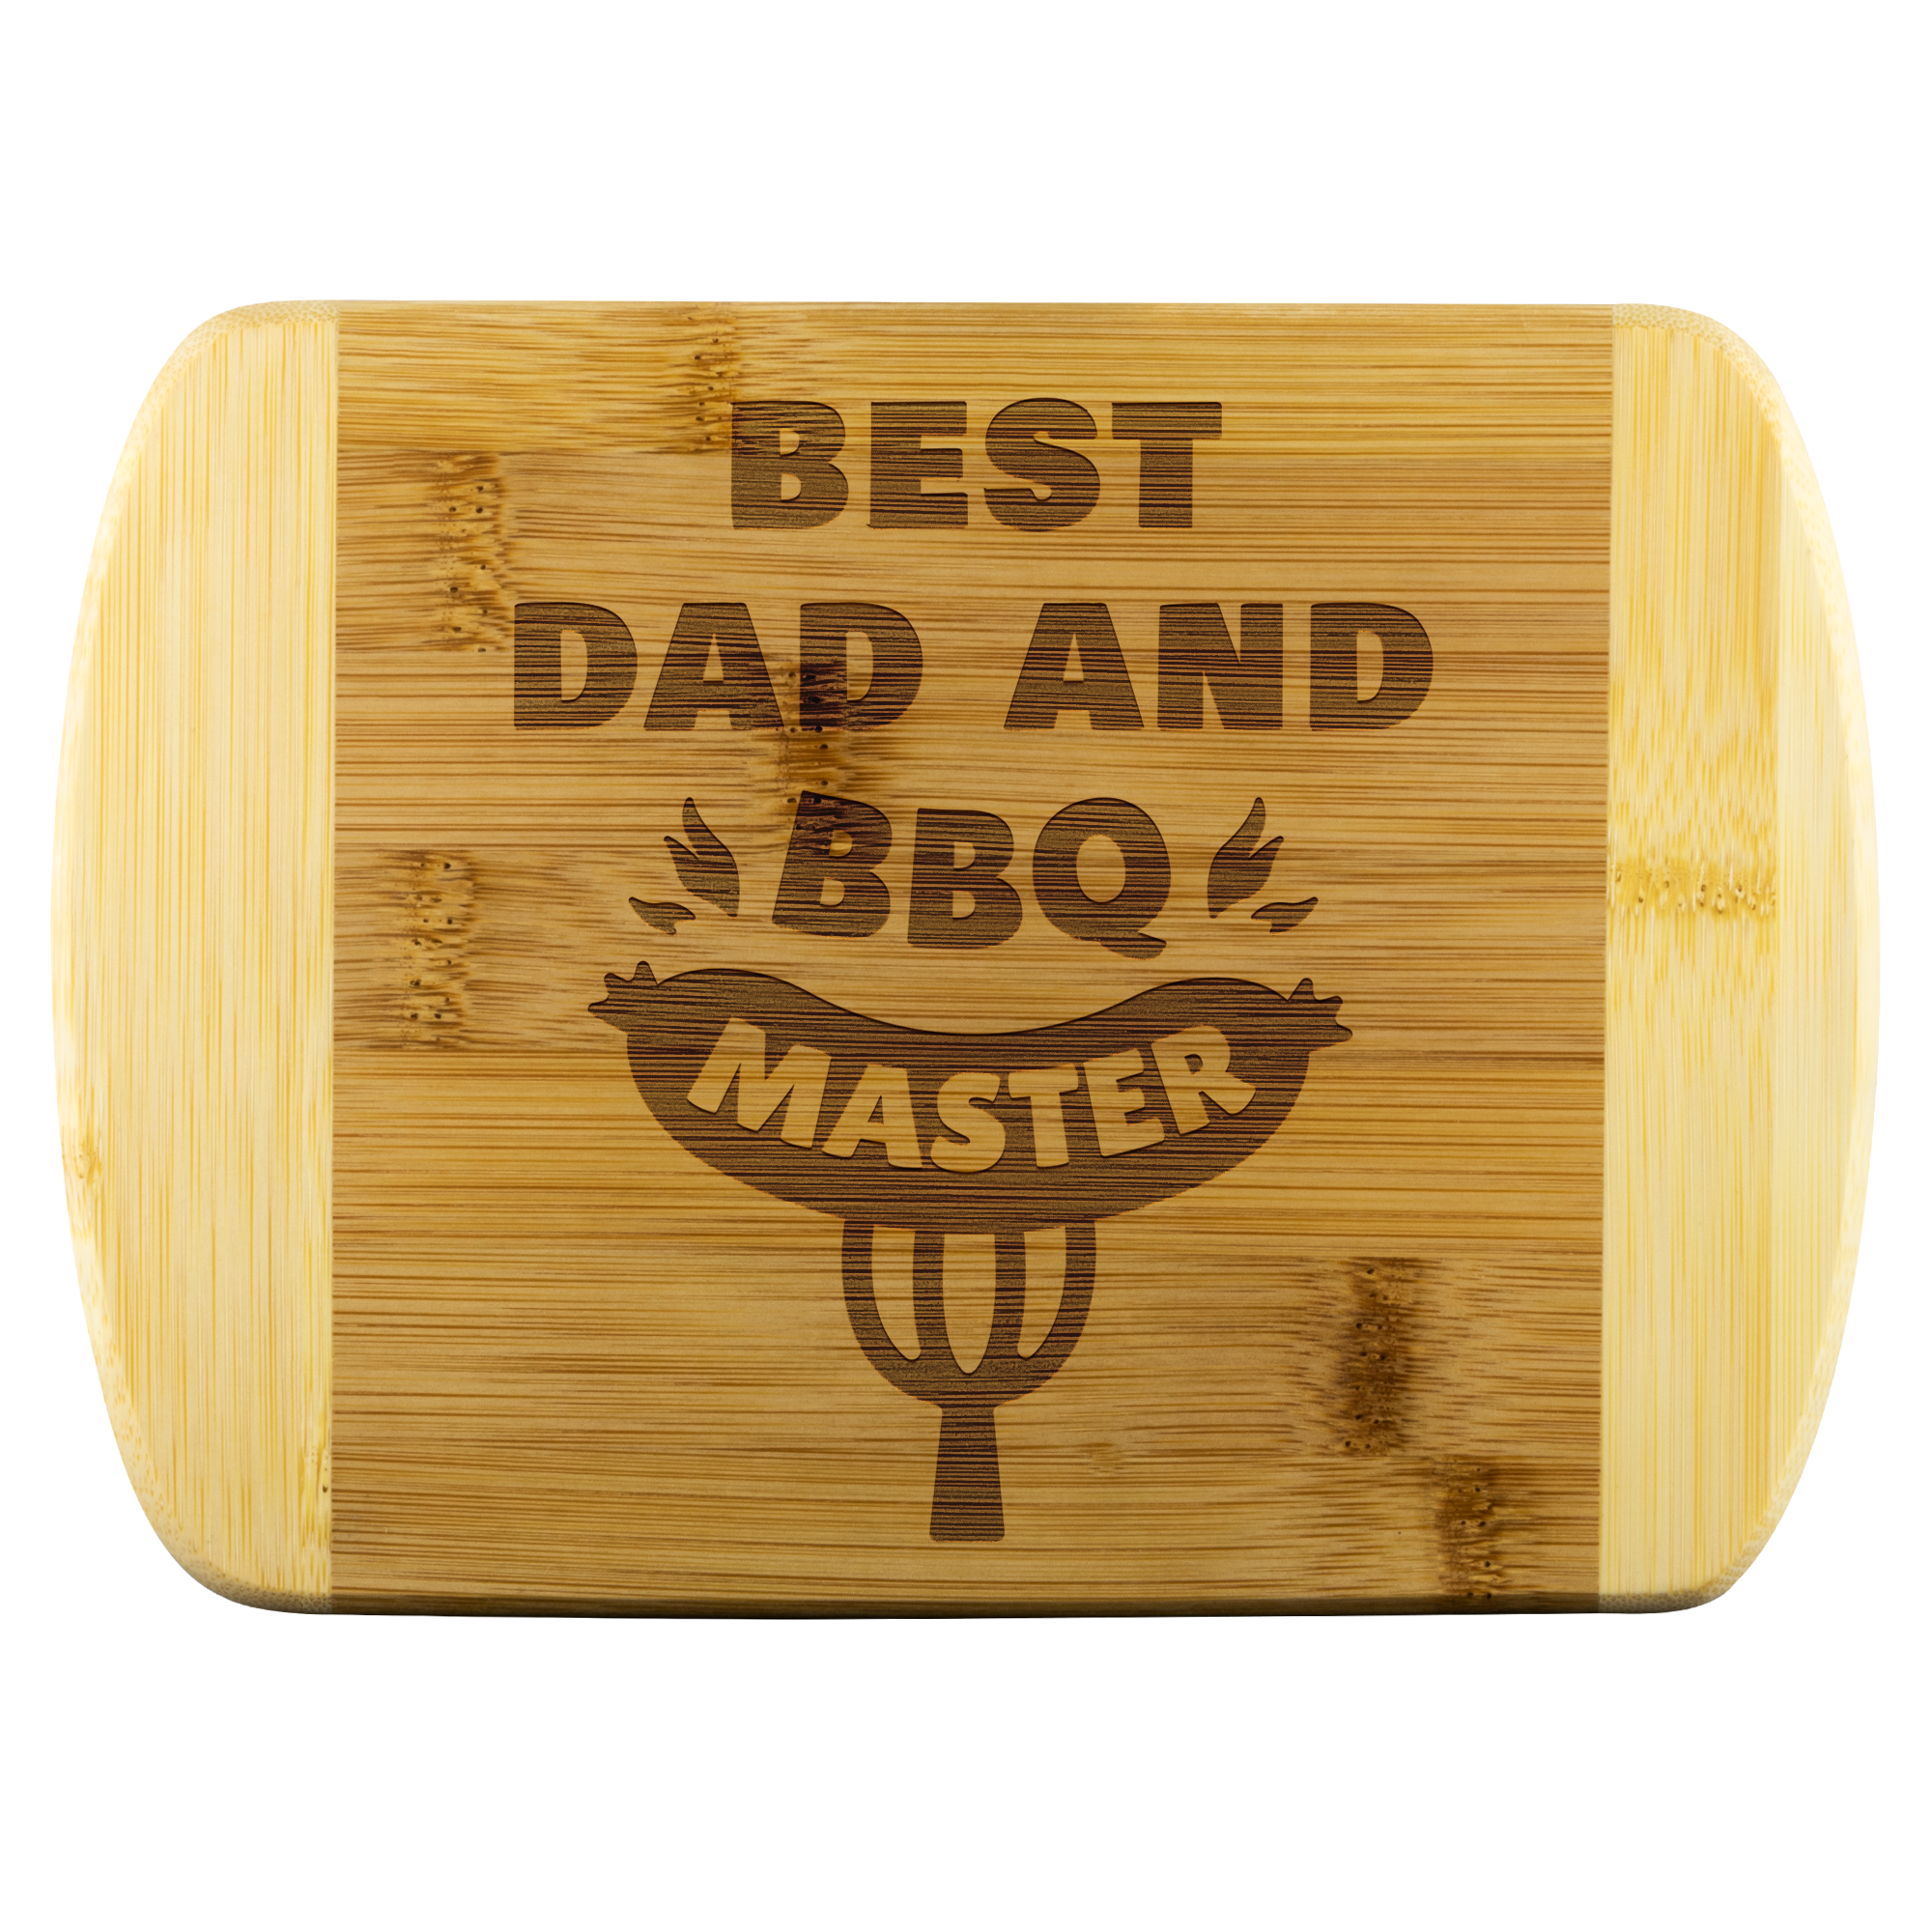 Best Dad and BBQ Master Wood Cutting Board